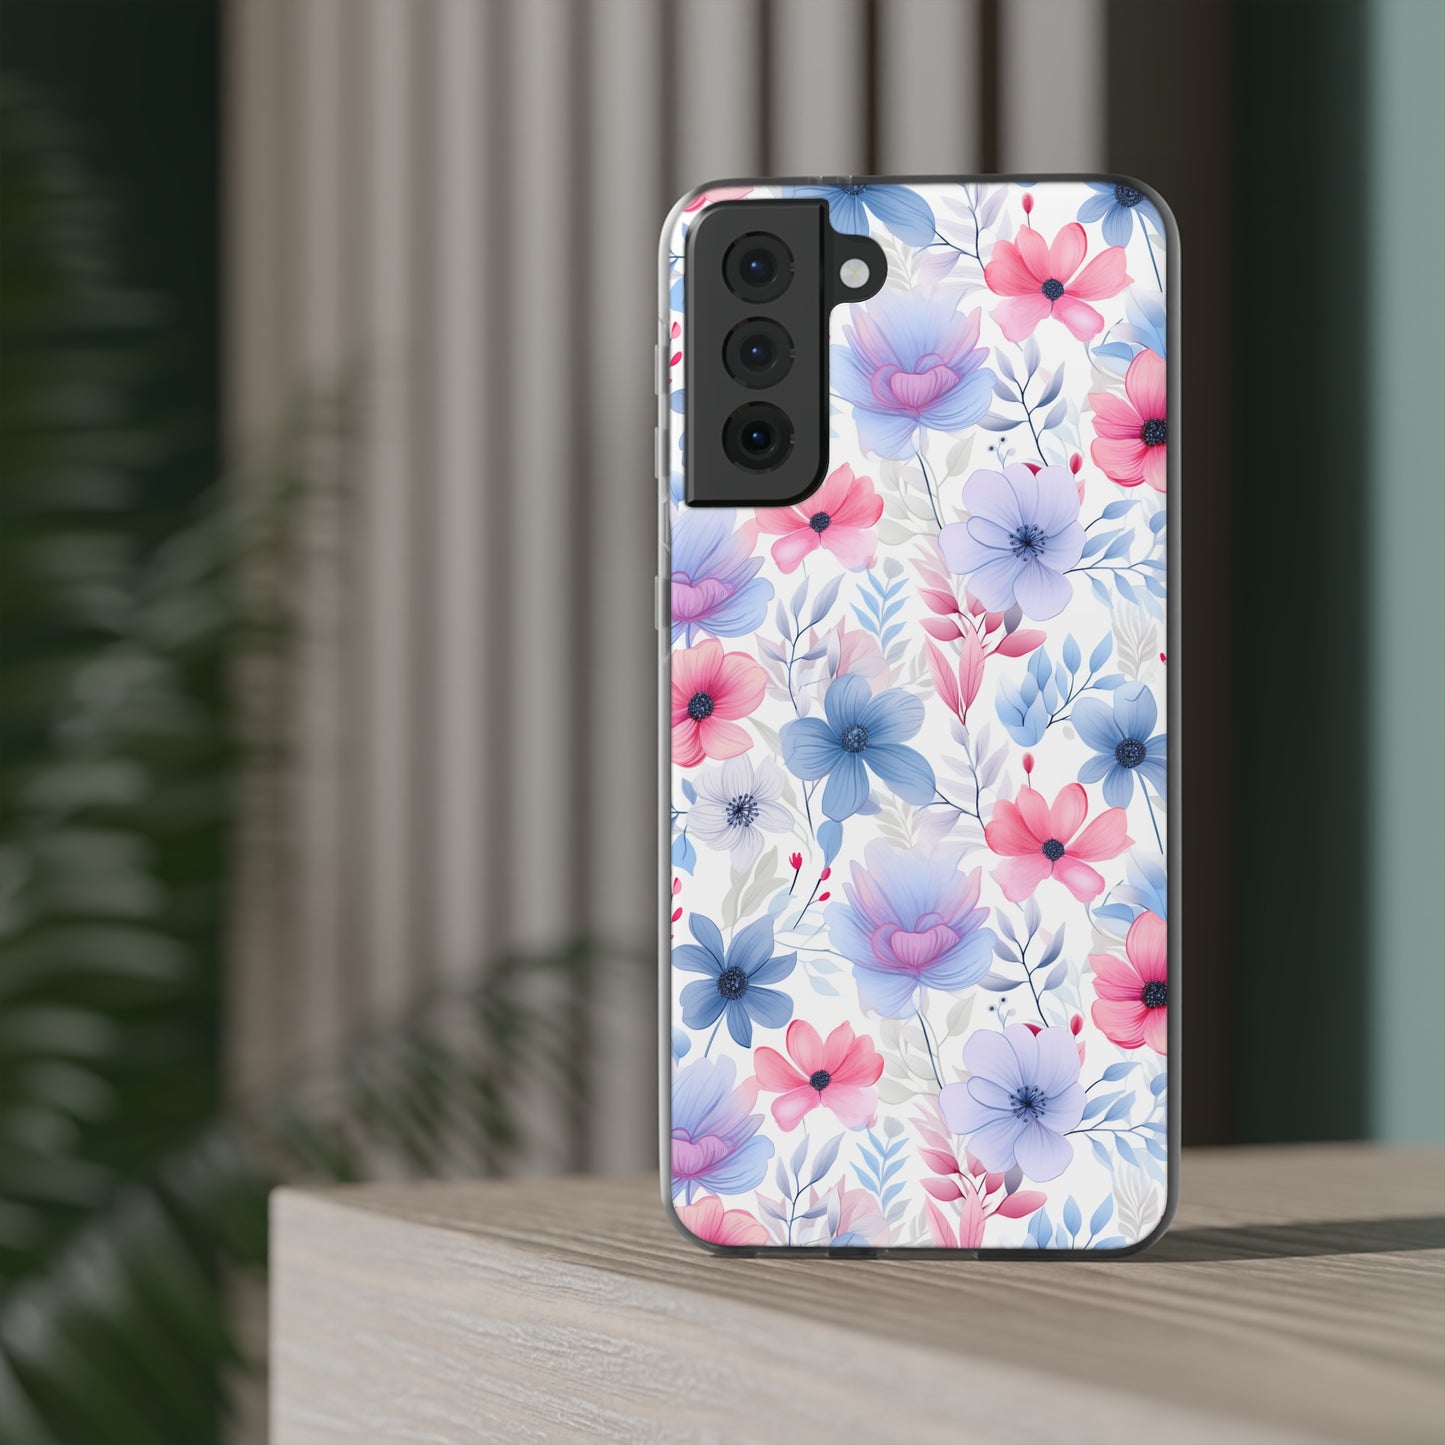 Floral Whispers - Soft Hues of Violets, Pinks, and Blues - Flexi Phone Case Phone Case Pattern Symphony Samsung Galaxy S21 Plus with gift packaging  